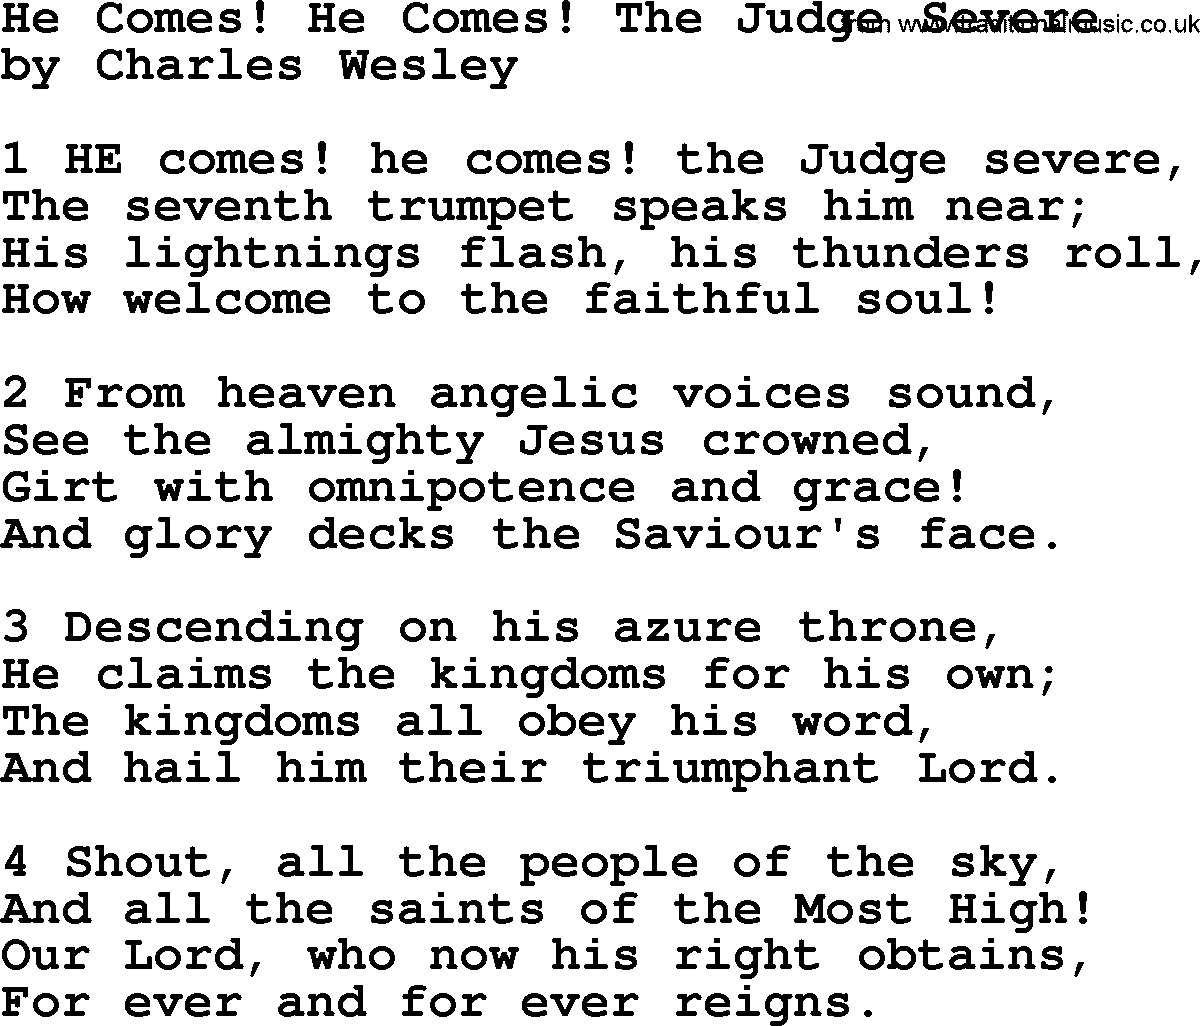 Charles Wesley hymn: He Comes! He Comes! The Judge Severe, lyrics